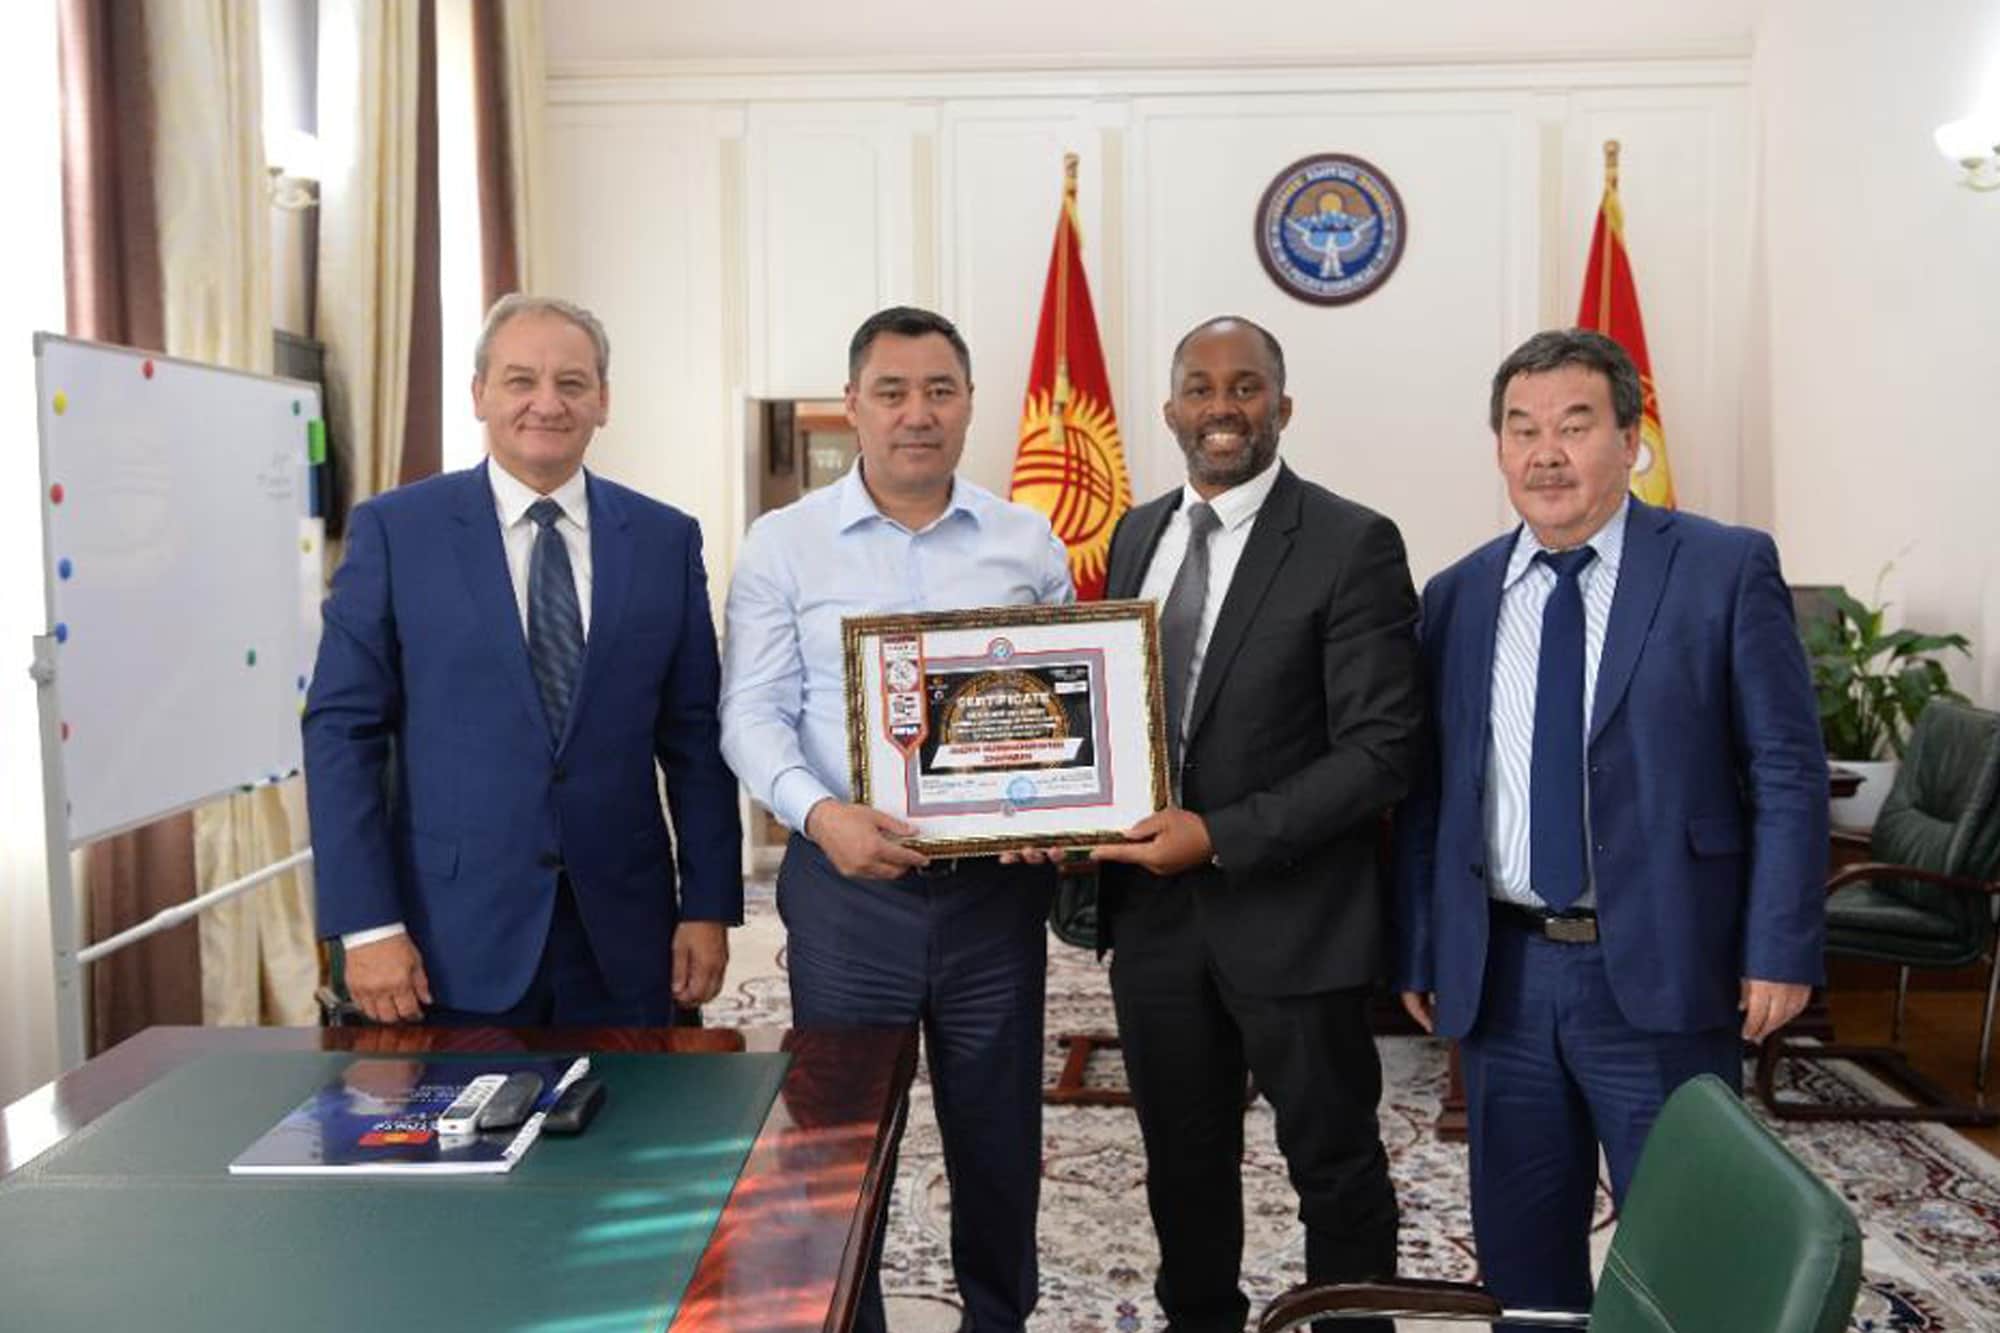 Kerrith Brown meets President of Kyrgyzstan who agrees to become Honorary President of the Kyrgyzstan MMA federation